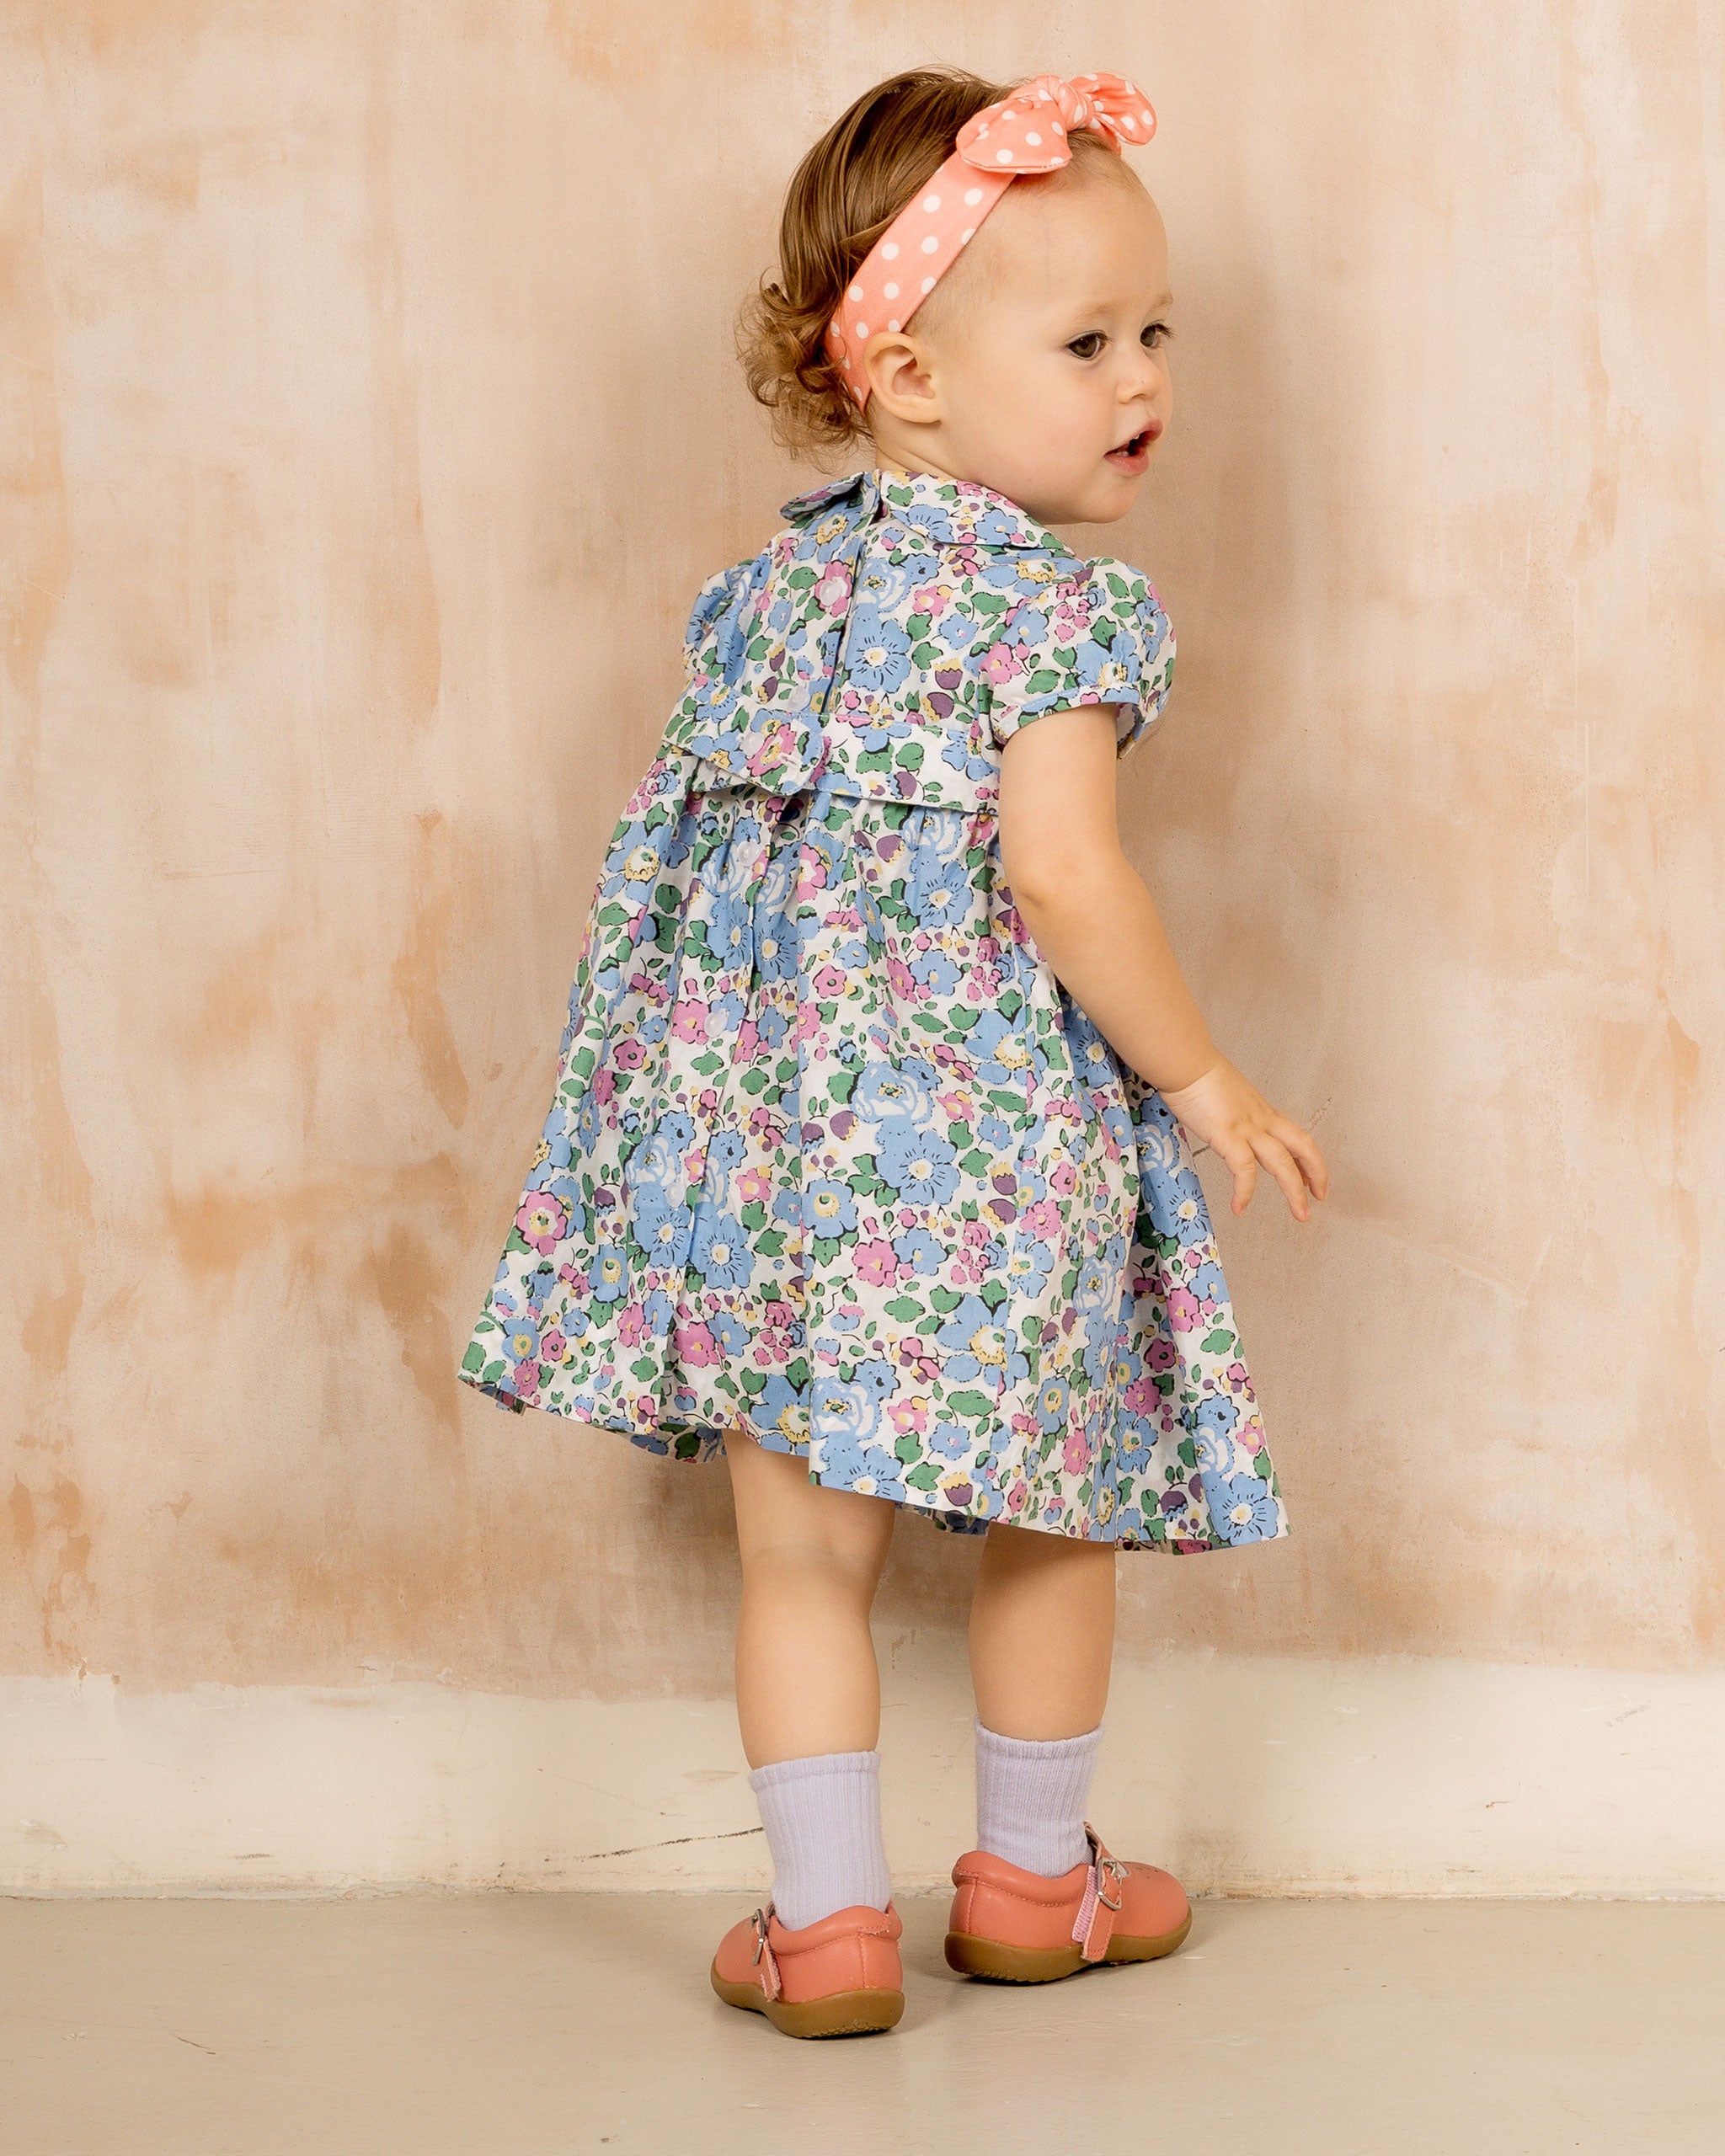 baby model in hand-smocked dress, back view 